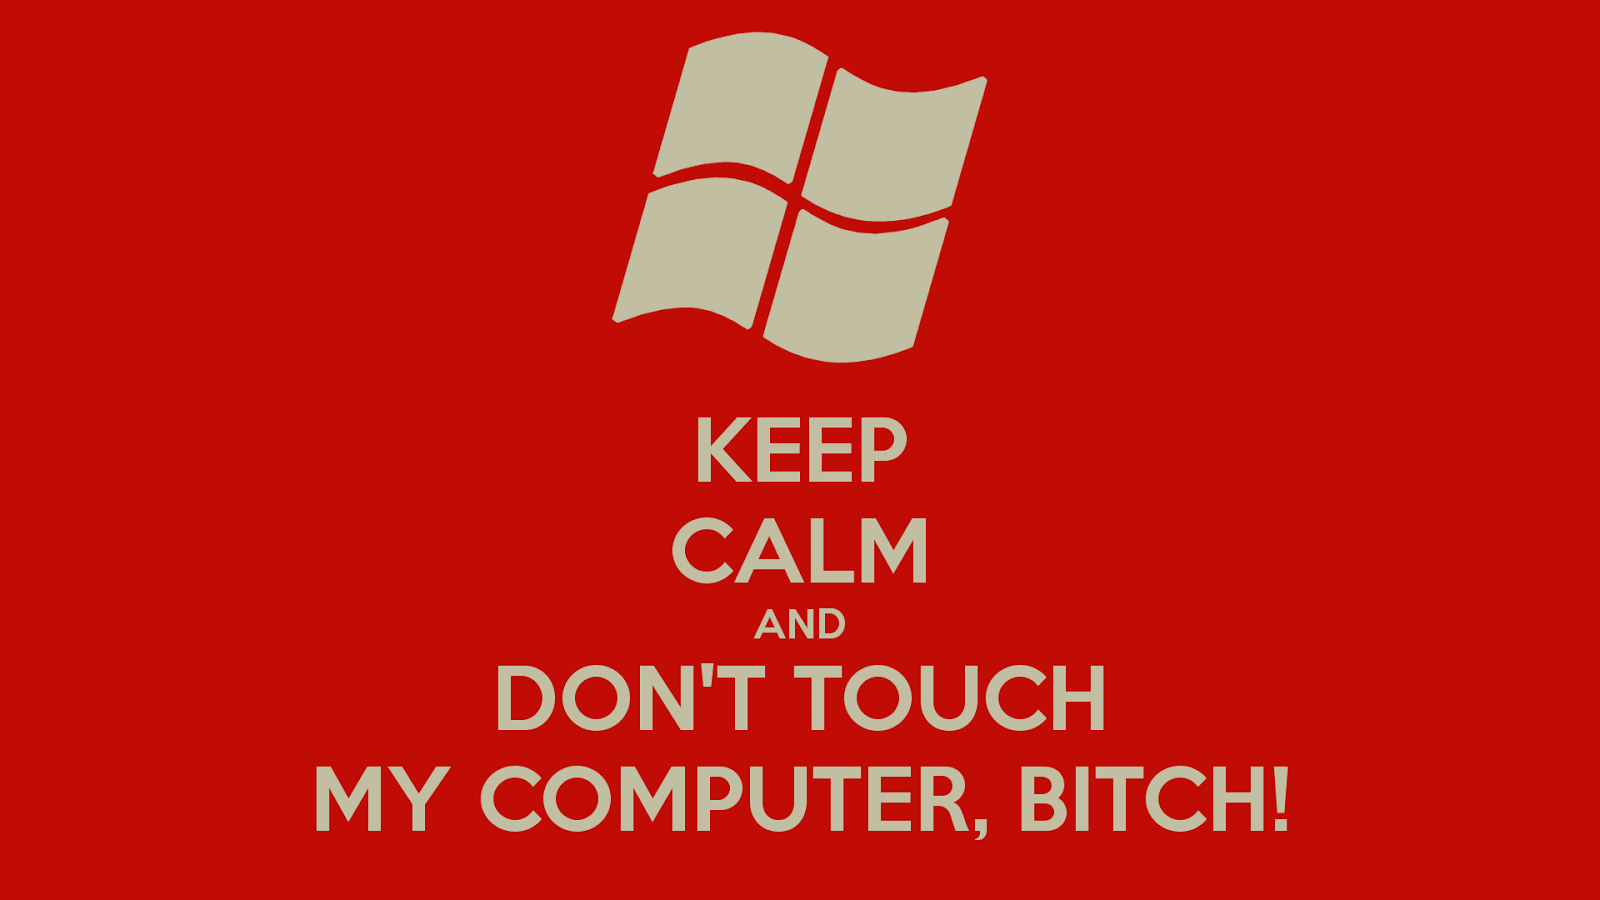 World Wildness Web: Don't touch my computer